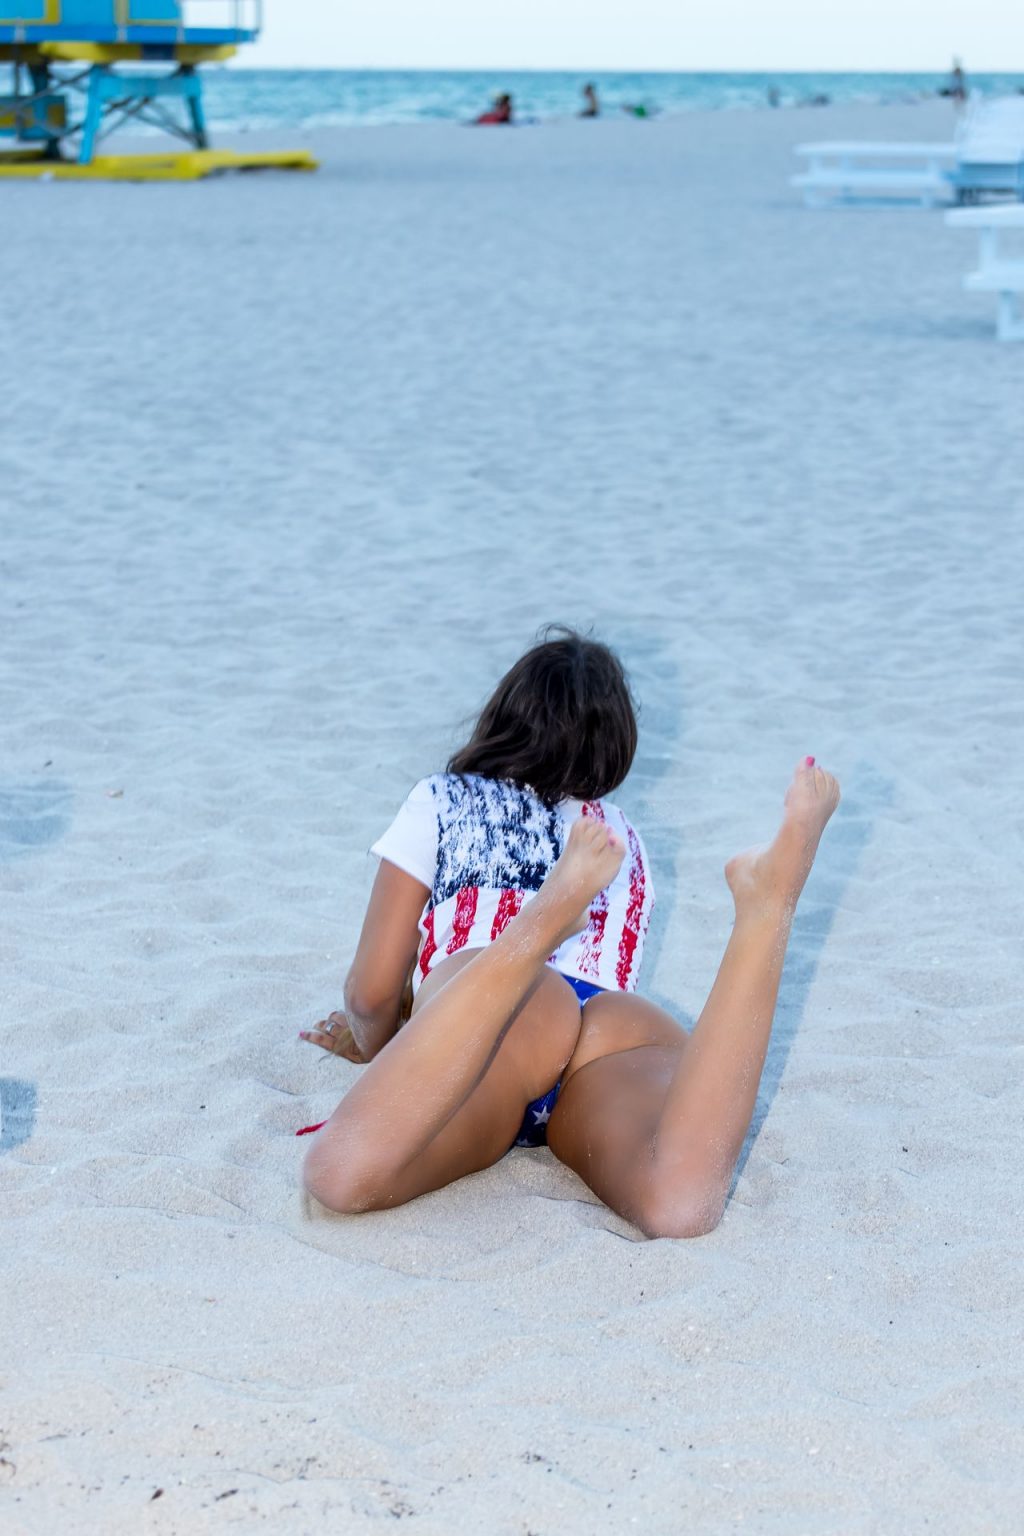 Claudia Romani Goes Topless for the 4th of July (21 Photos)